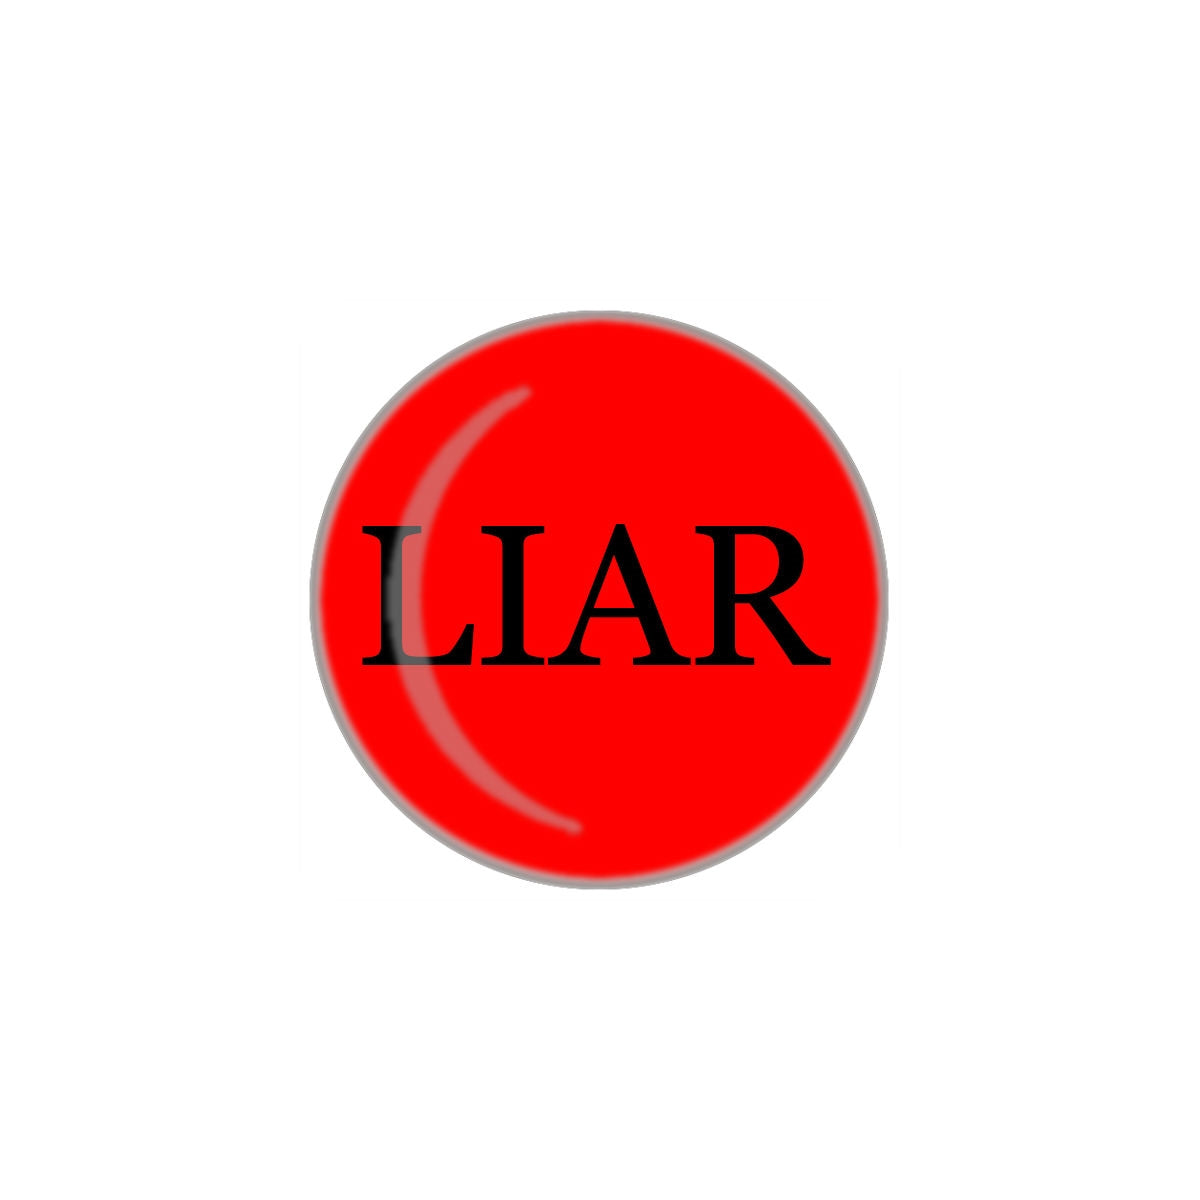 "Liar" black text on red 1" round metal pinback button